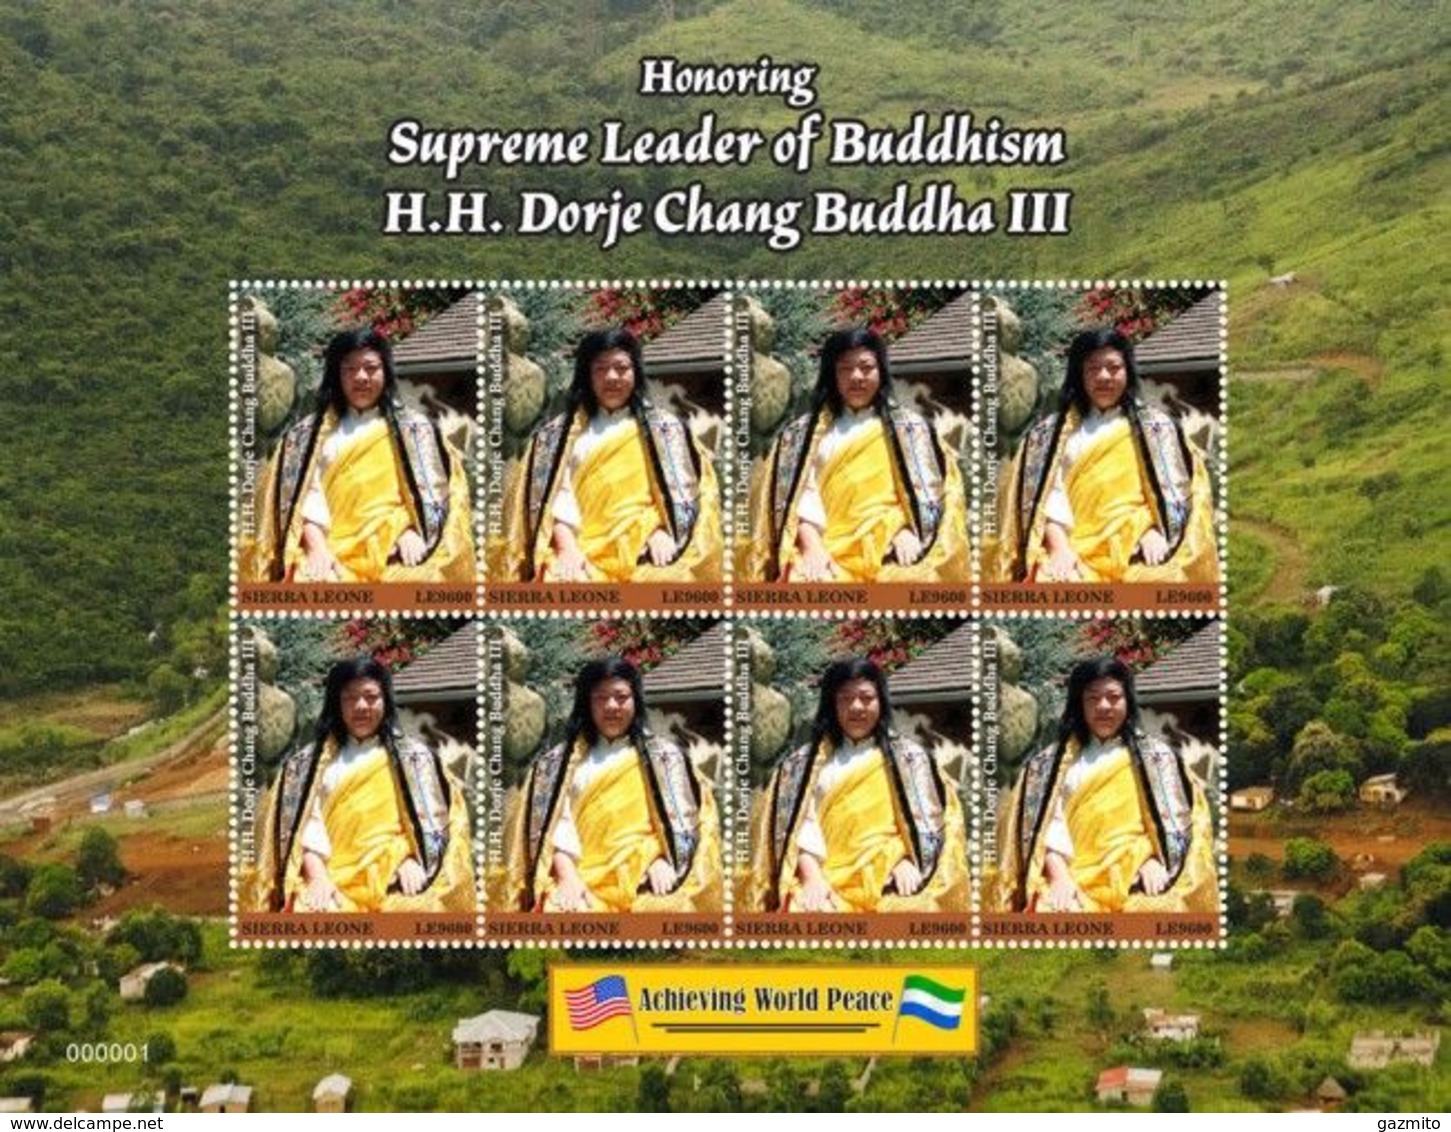 Sierra Leone 2020, His Holiness Dorje Chang Buddha III, Joint With Djibouti, Liberia, Centrafrica., Niger Sheetlet - Buddhism